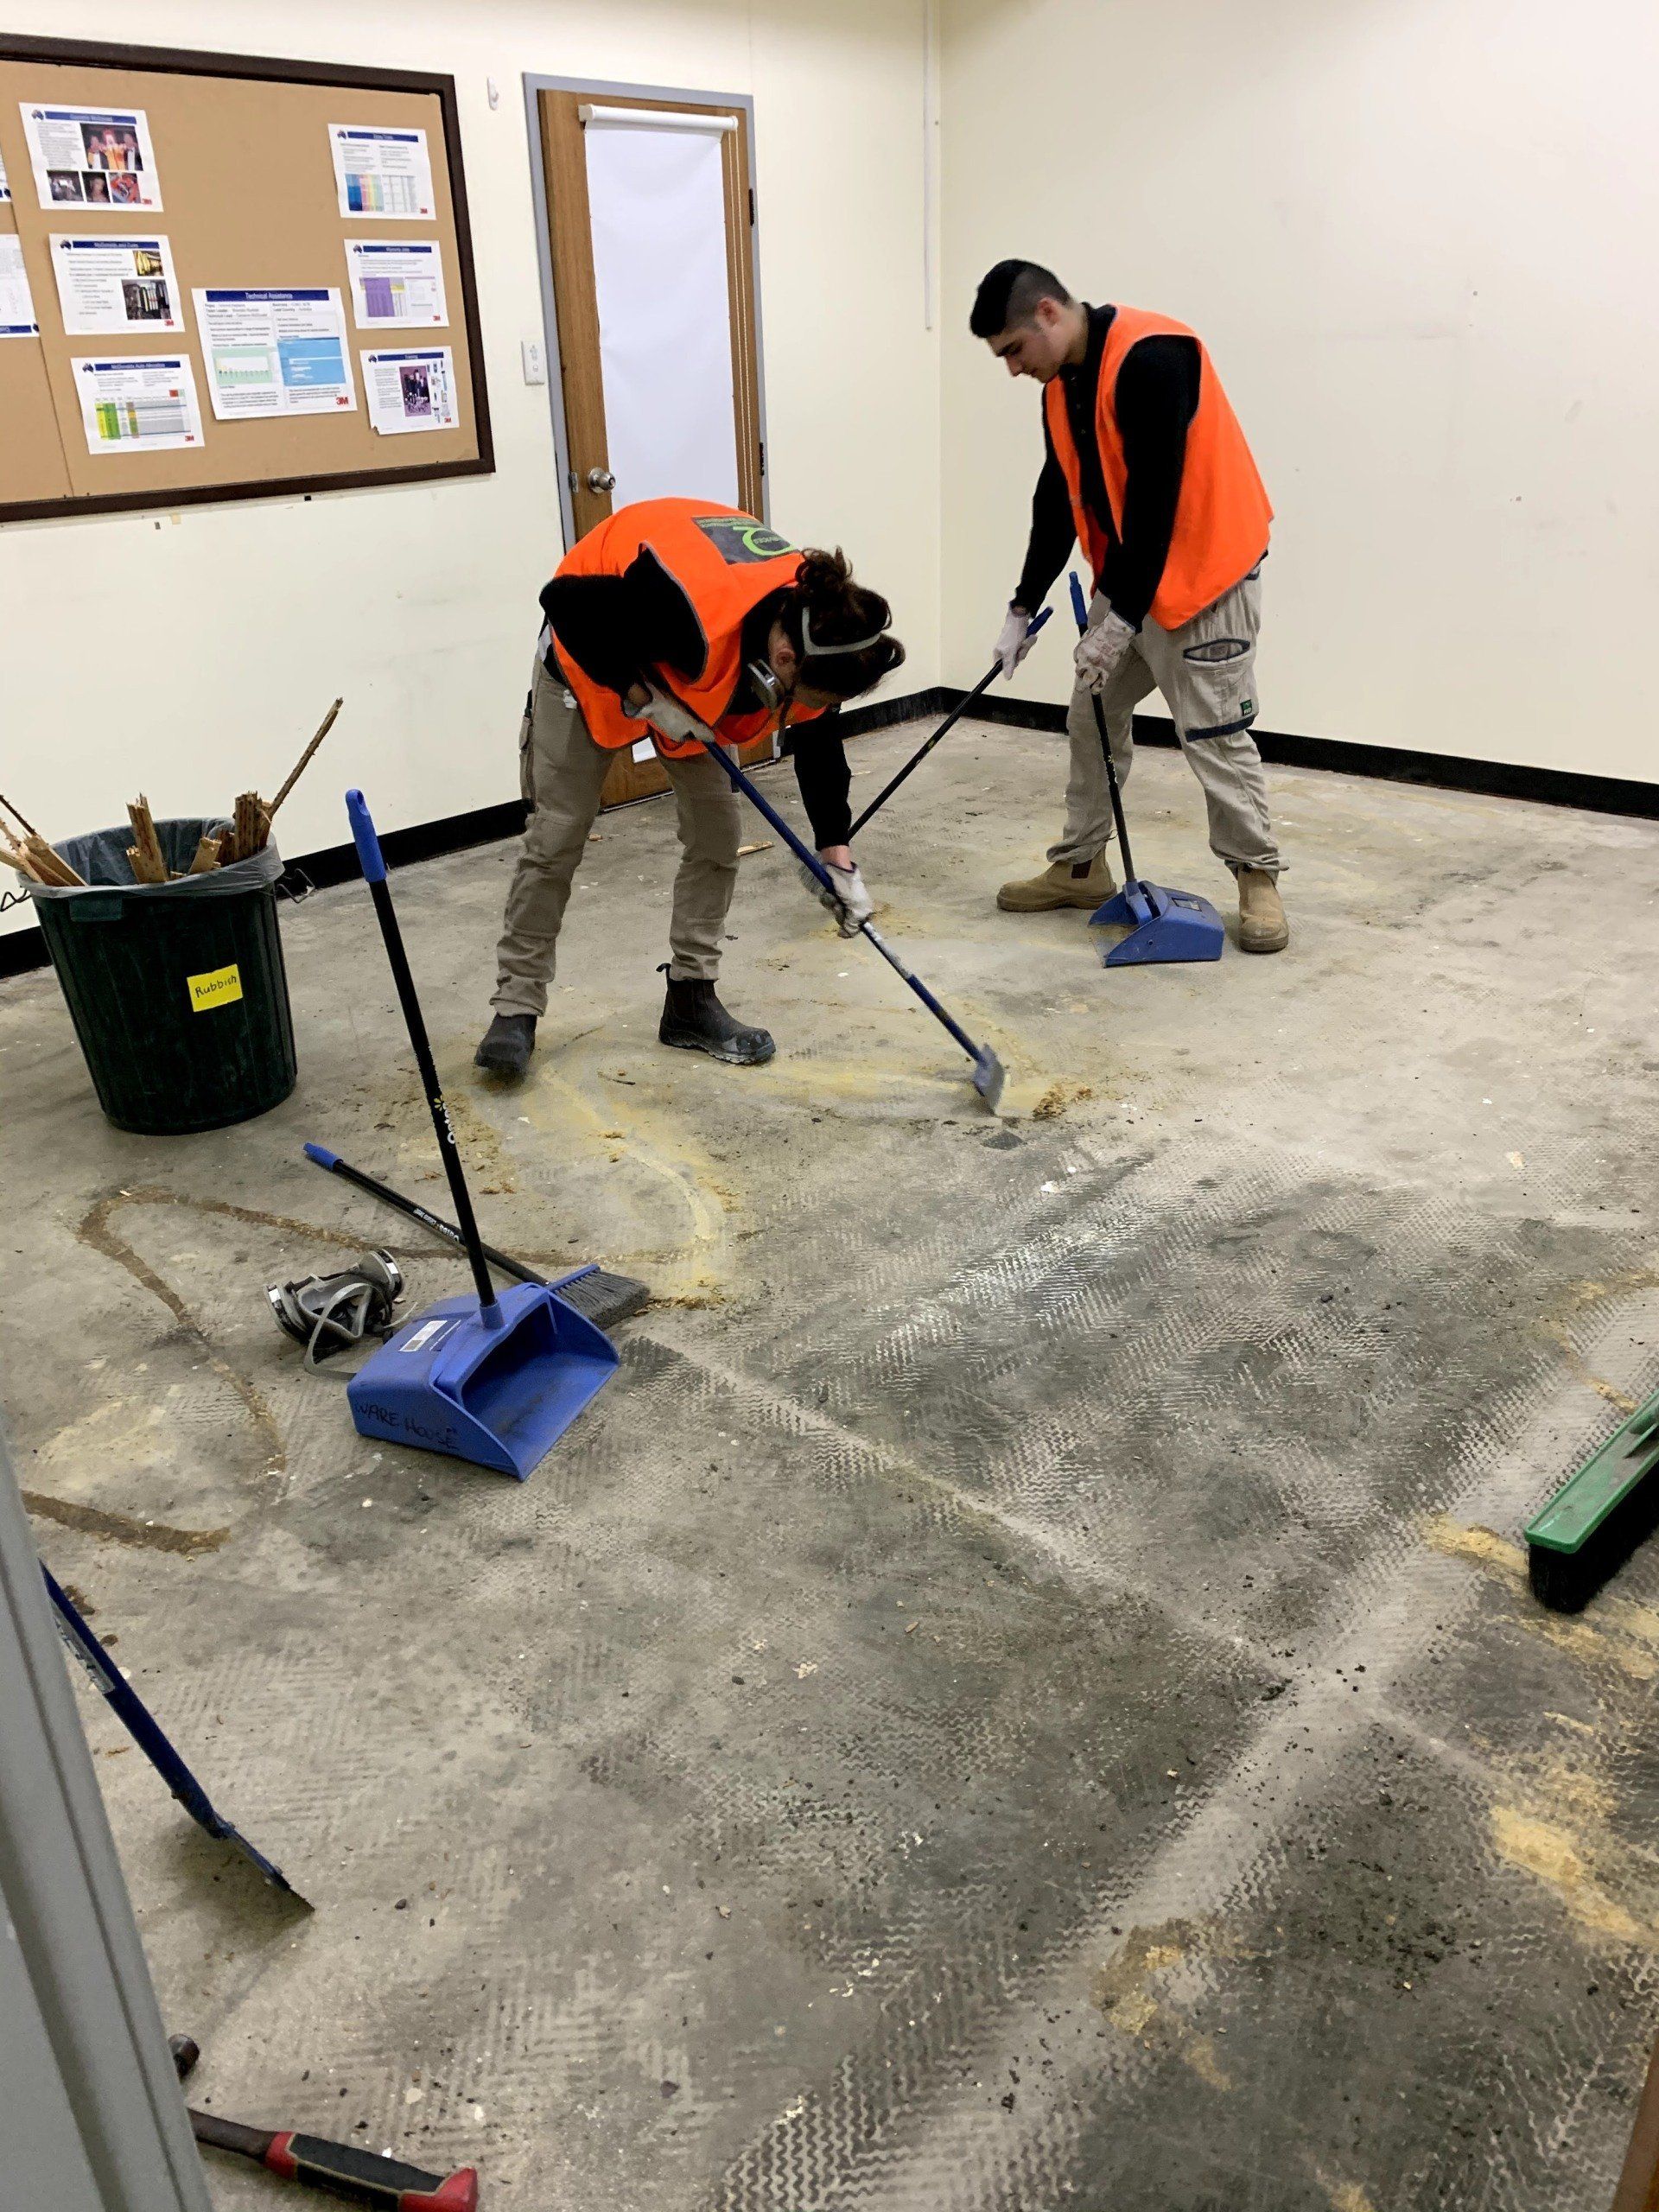 two men are cleaning the floor of a room with brooms .